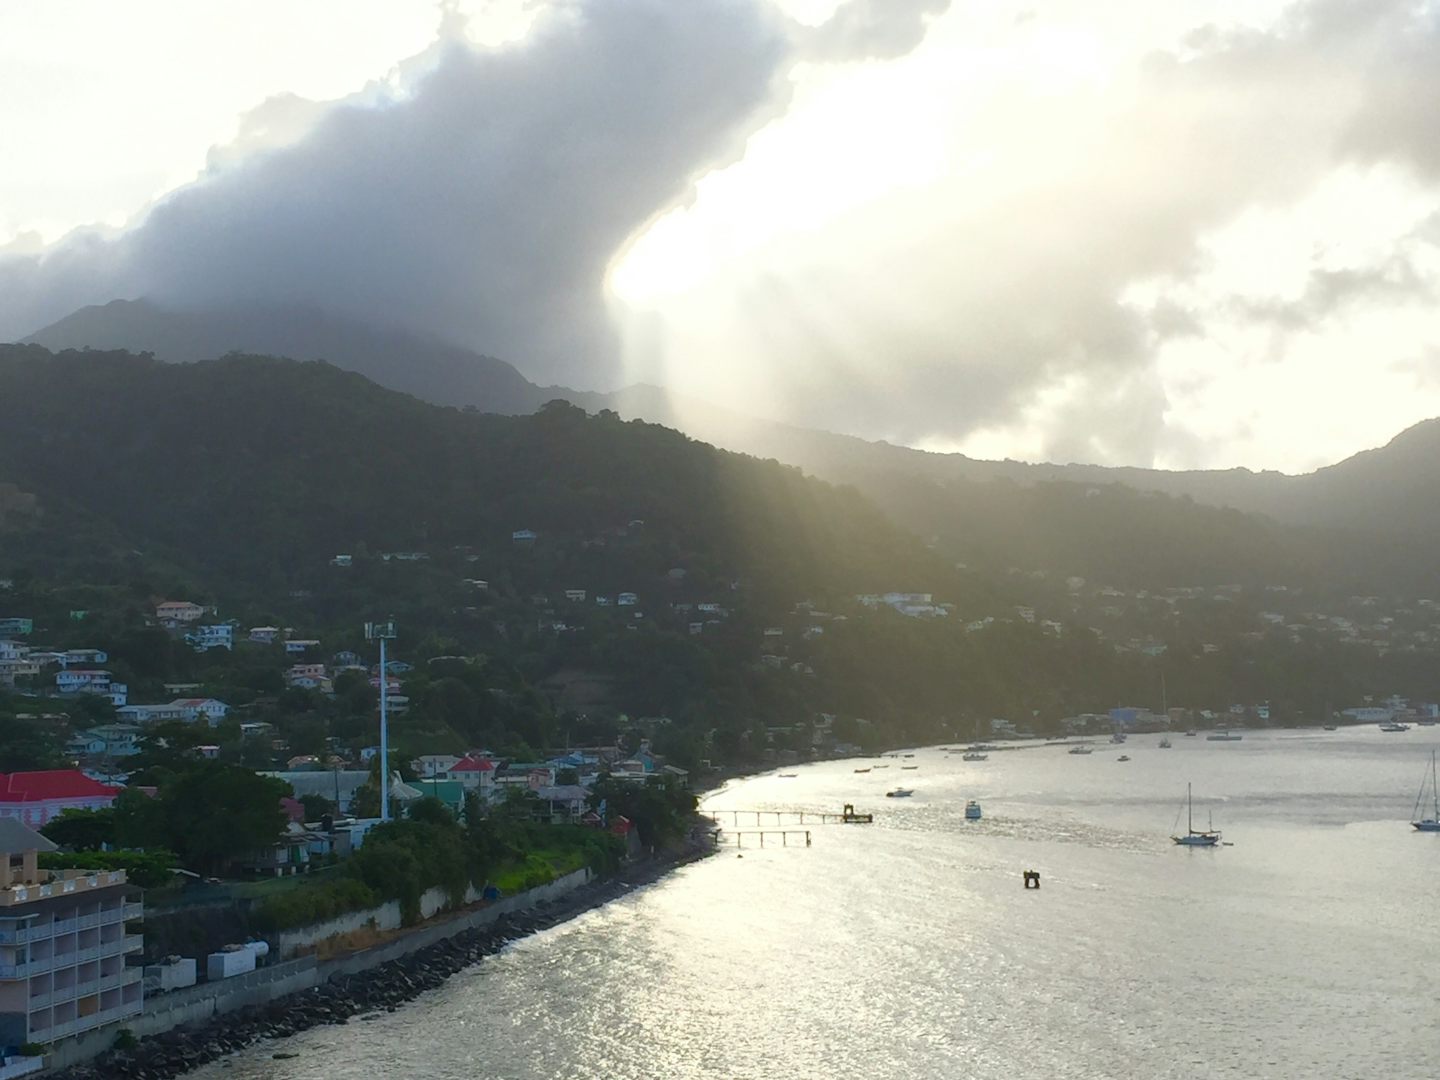 Sunrise over the mountain and through the clouds at St. Marteen